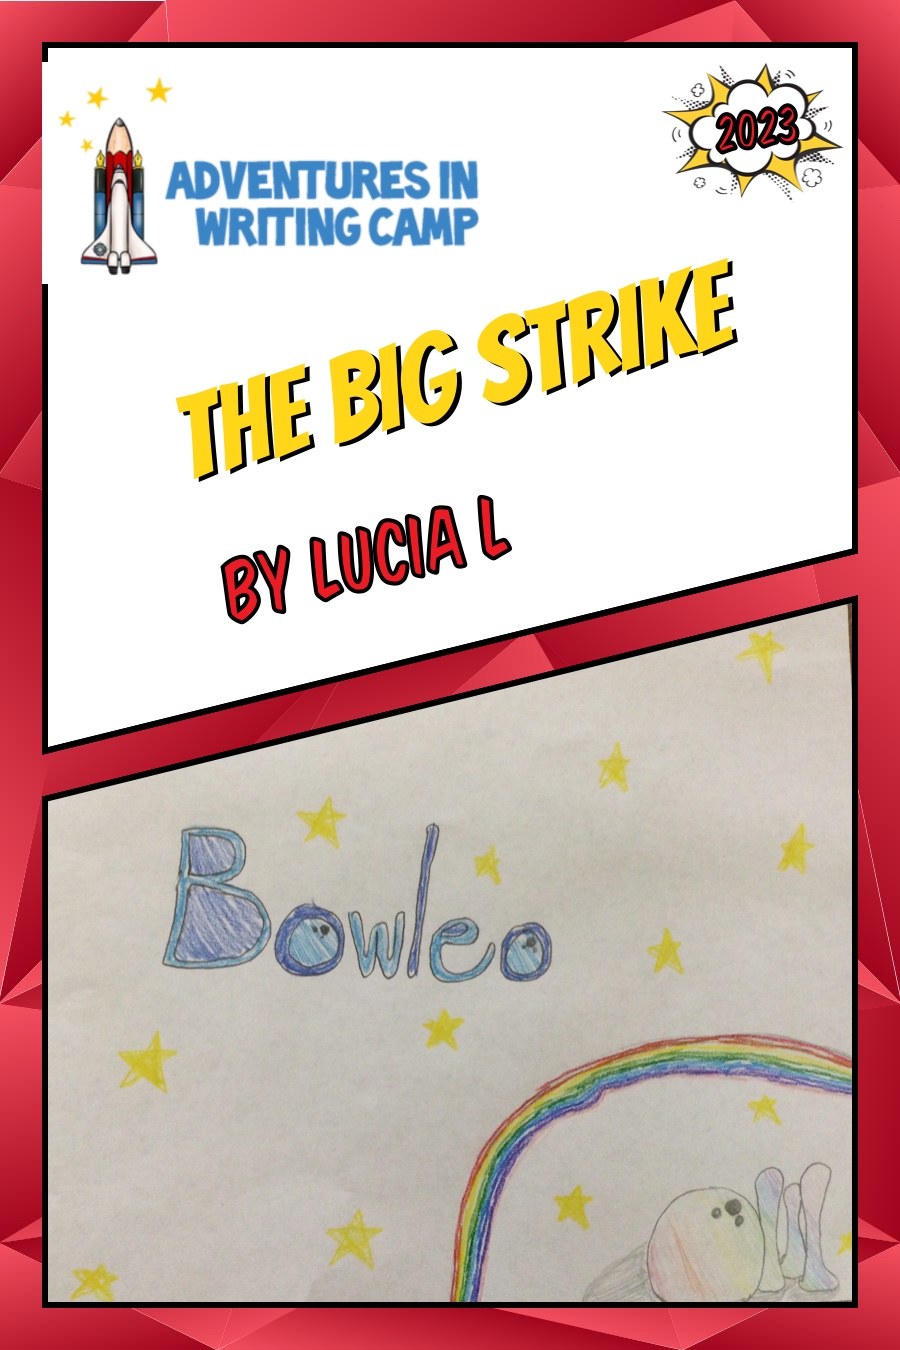 The Big Strike by Lucia L